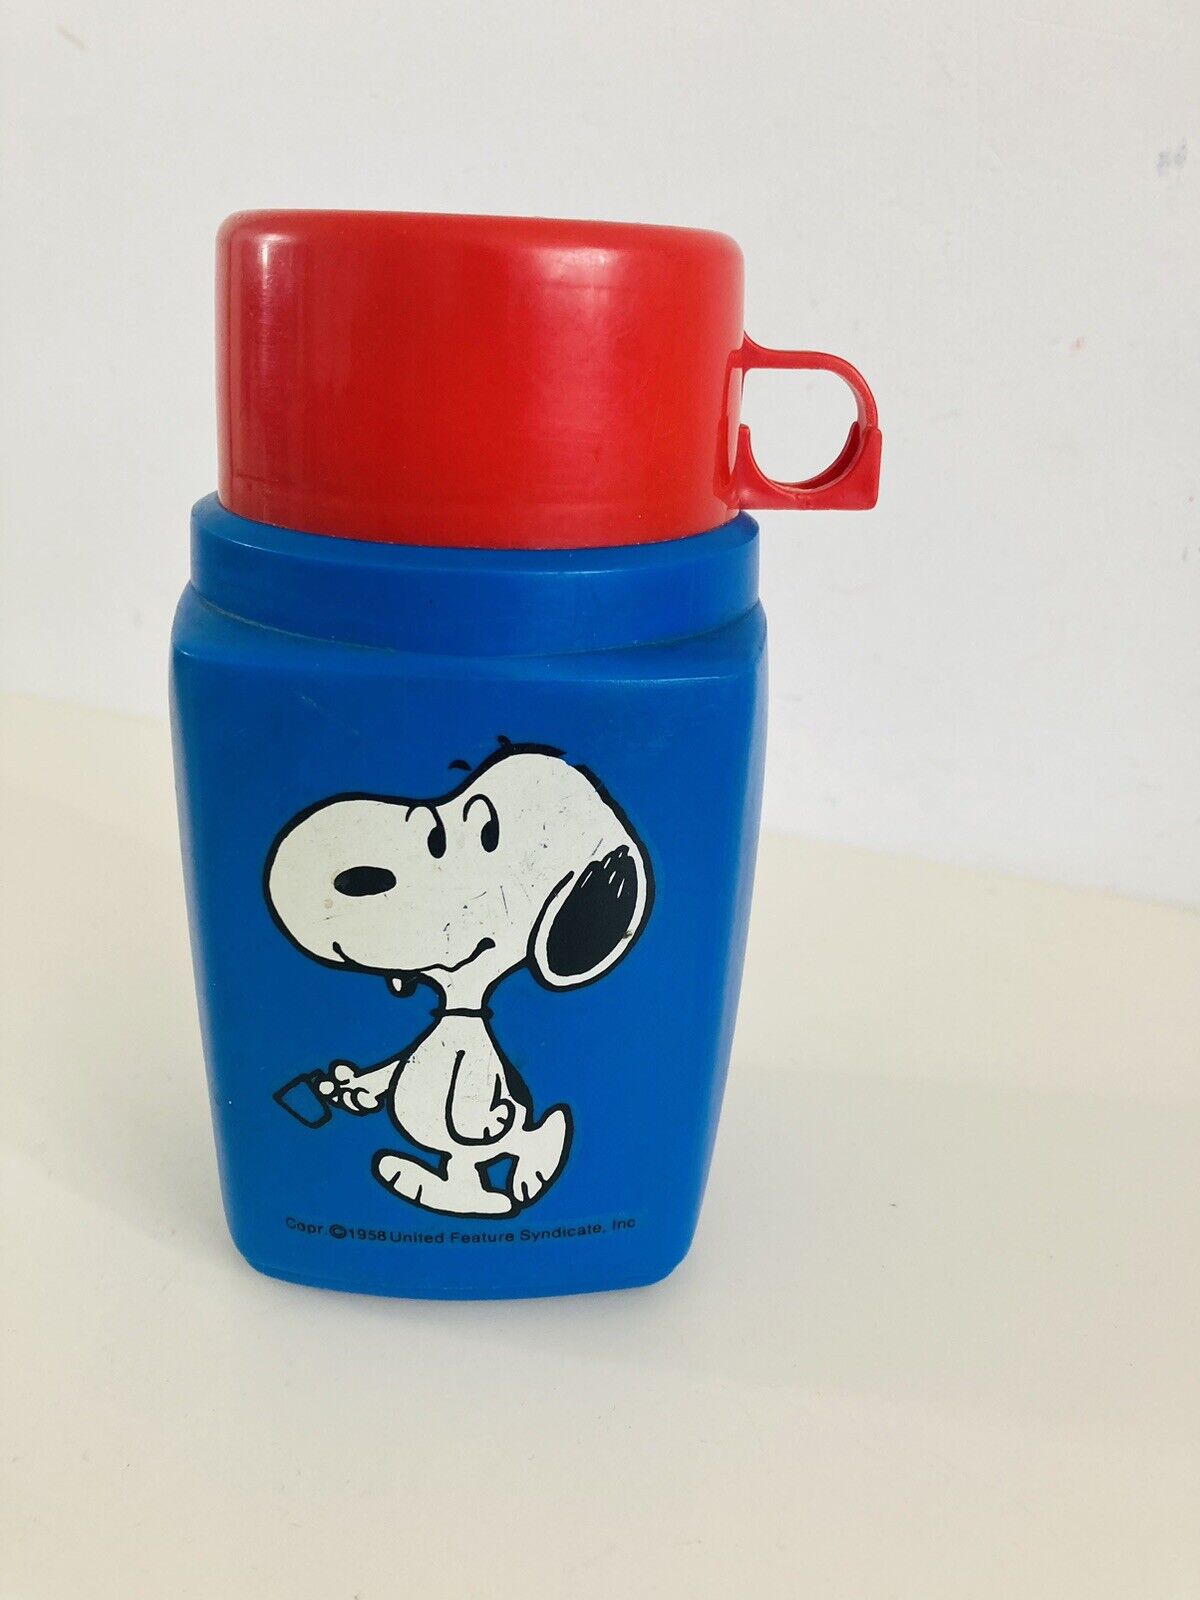 Vintage 1958 Snoopy Thermos Roughneck Flask Blue W Cup